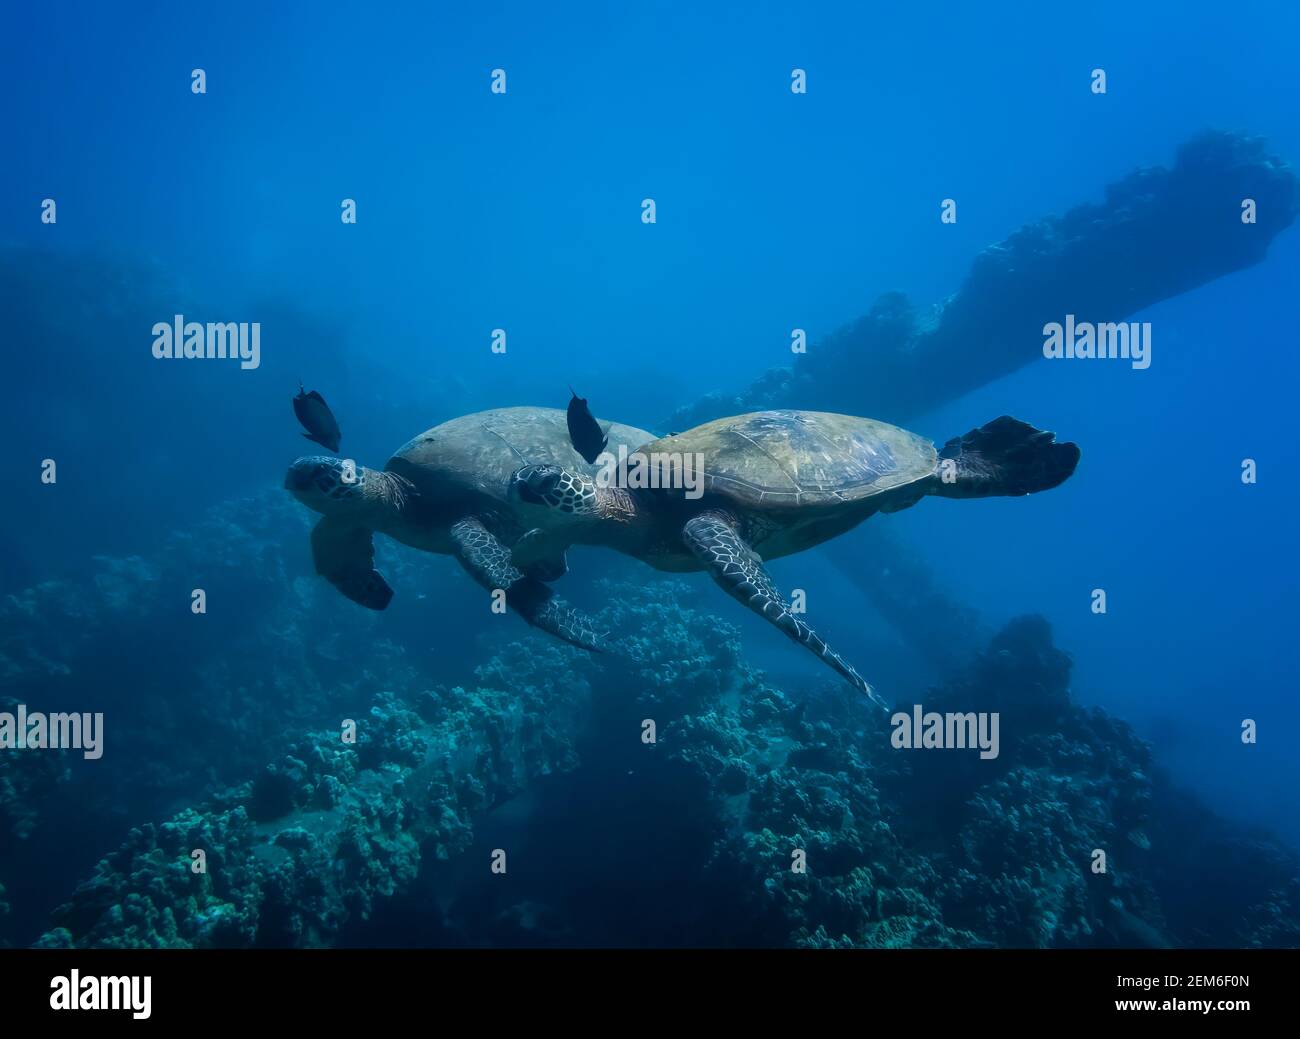 Pair of Hawaiian green sea turtles swim side by side over reef with identical black fish hovering over their heads. Stock Photo